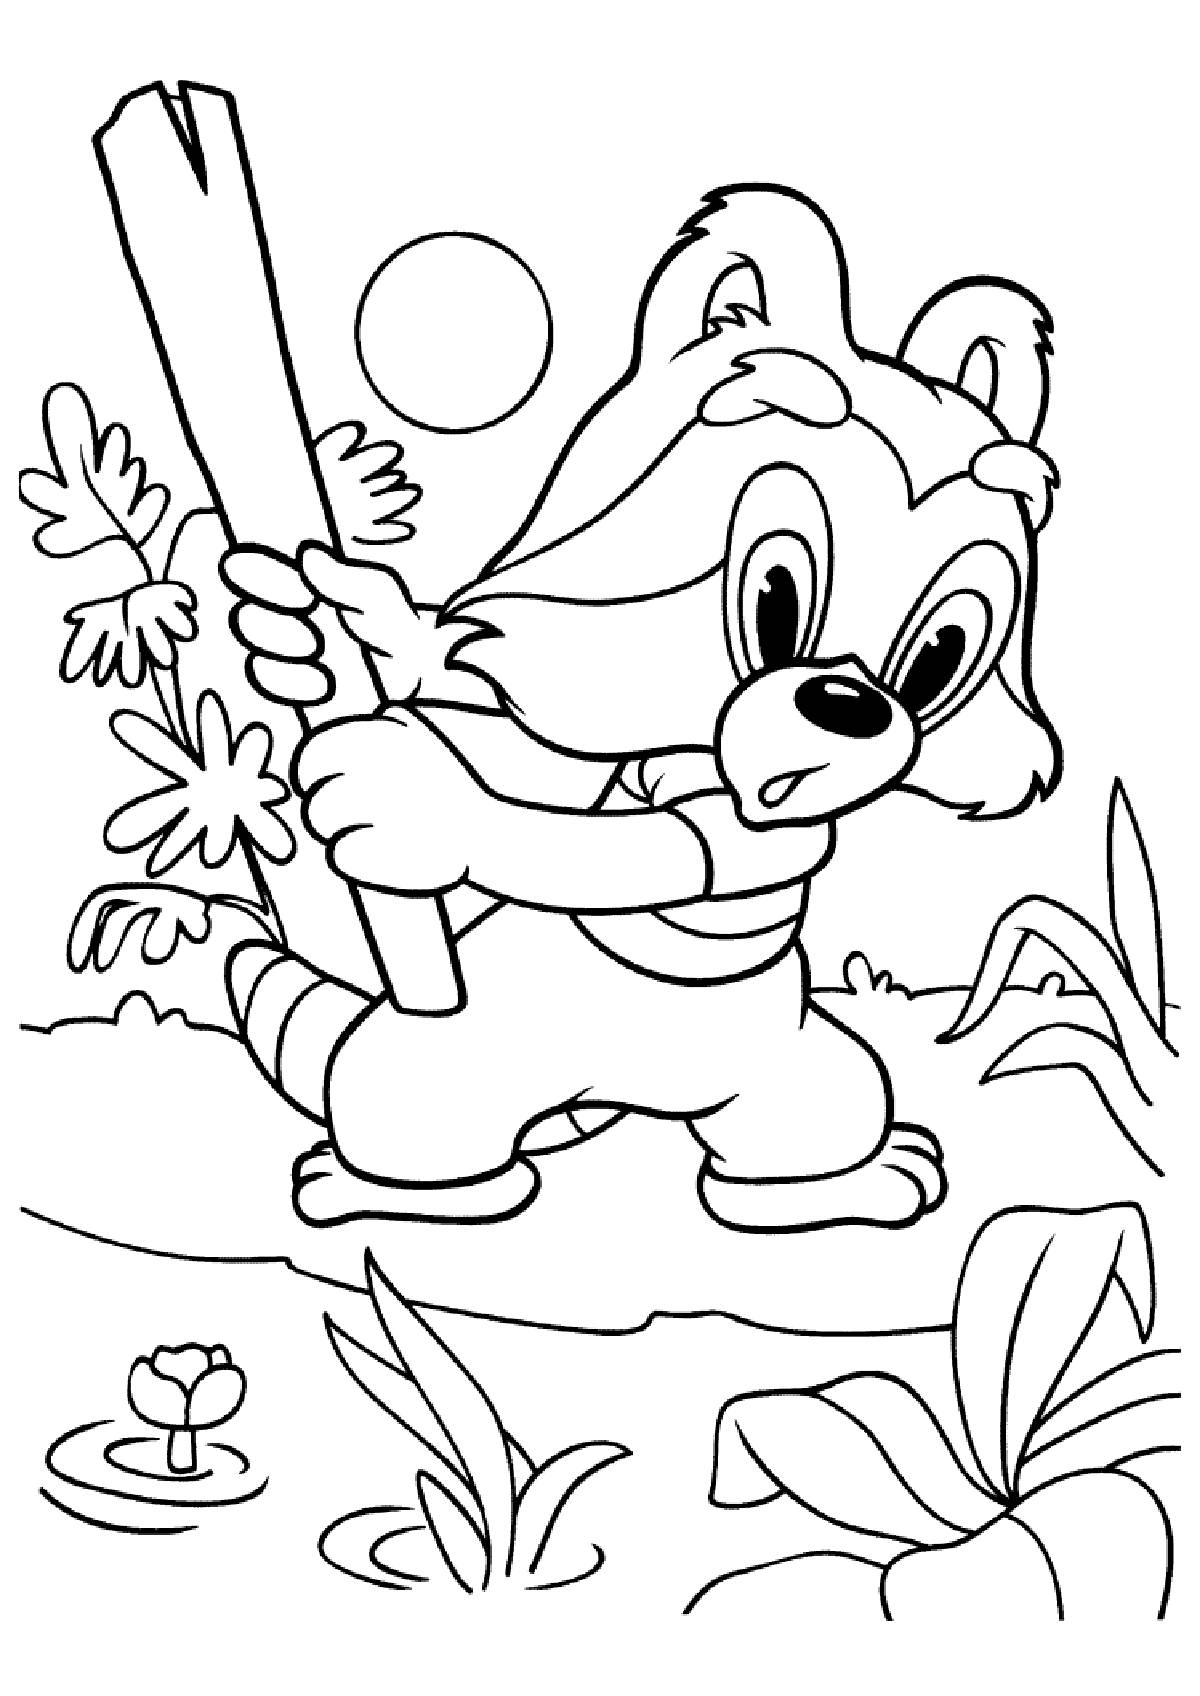 Raccoon with a stick